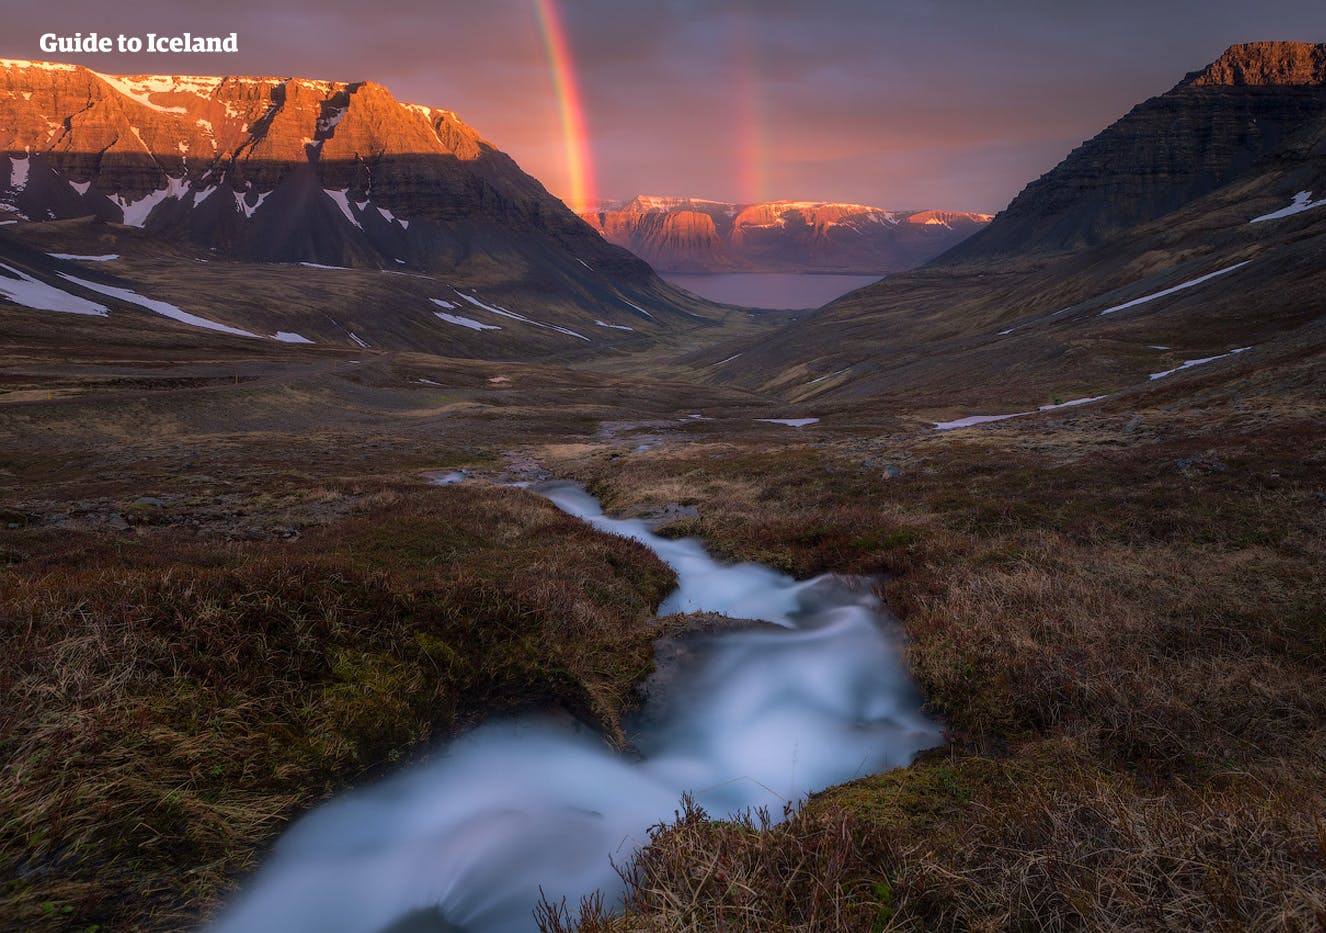 A small, yet beautiful river in the Westfjords with snow speckled on the surrounding mountains in the summertime and the sun casting a gorgeous rainbow in the distance.